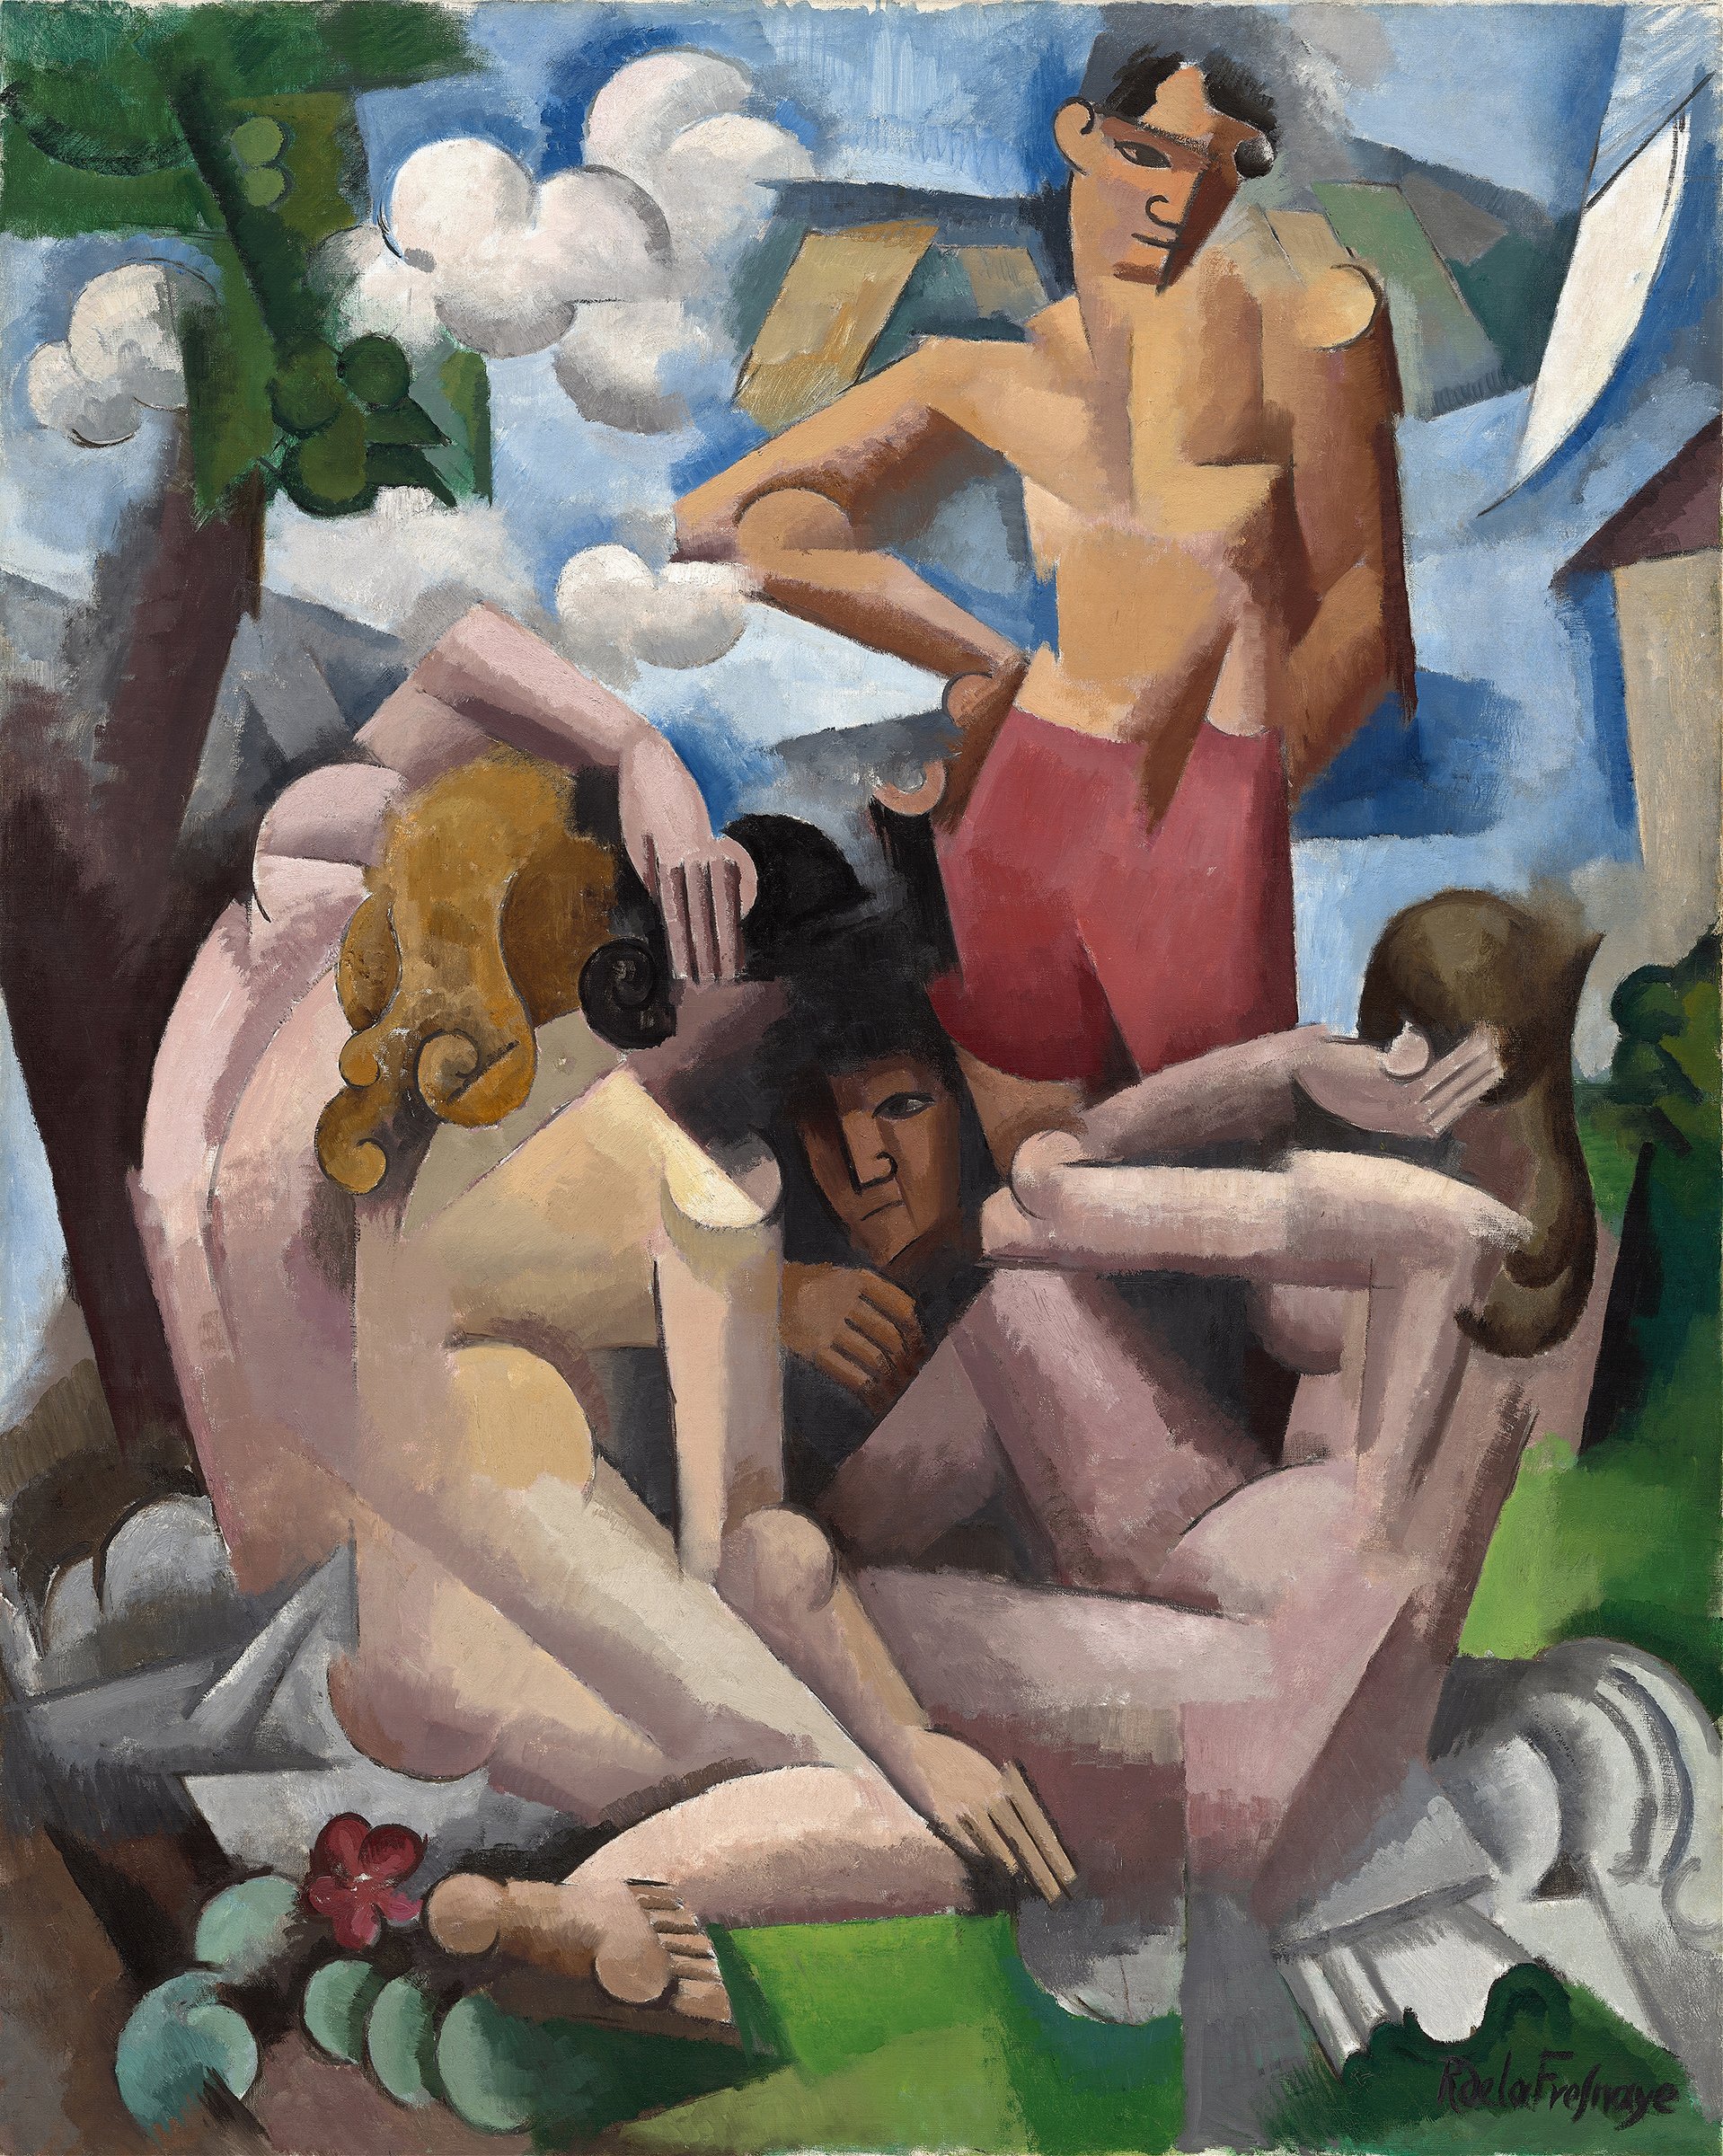 The Bathers (1912)